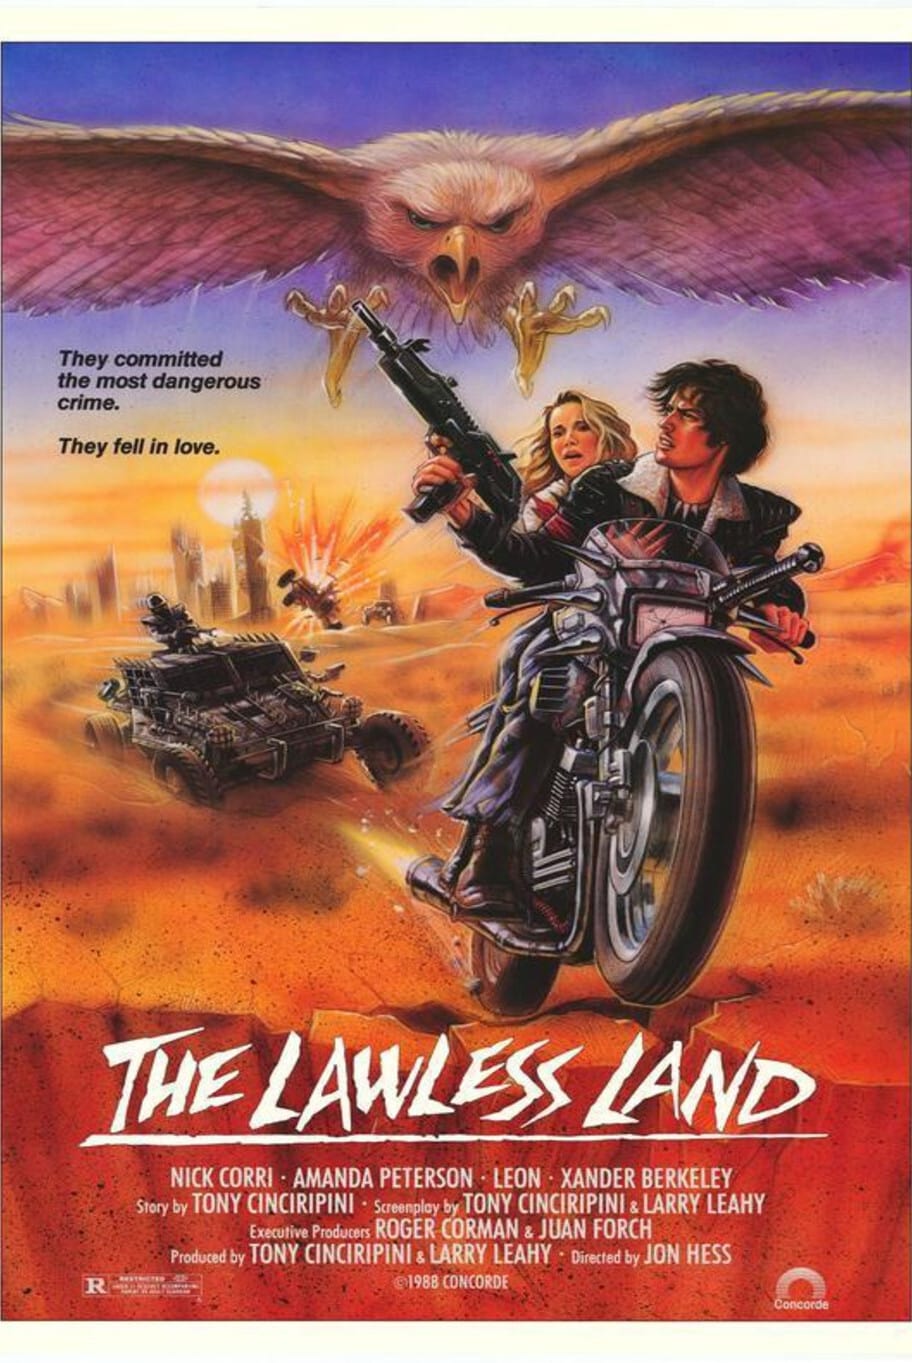 The Lawless Land film